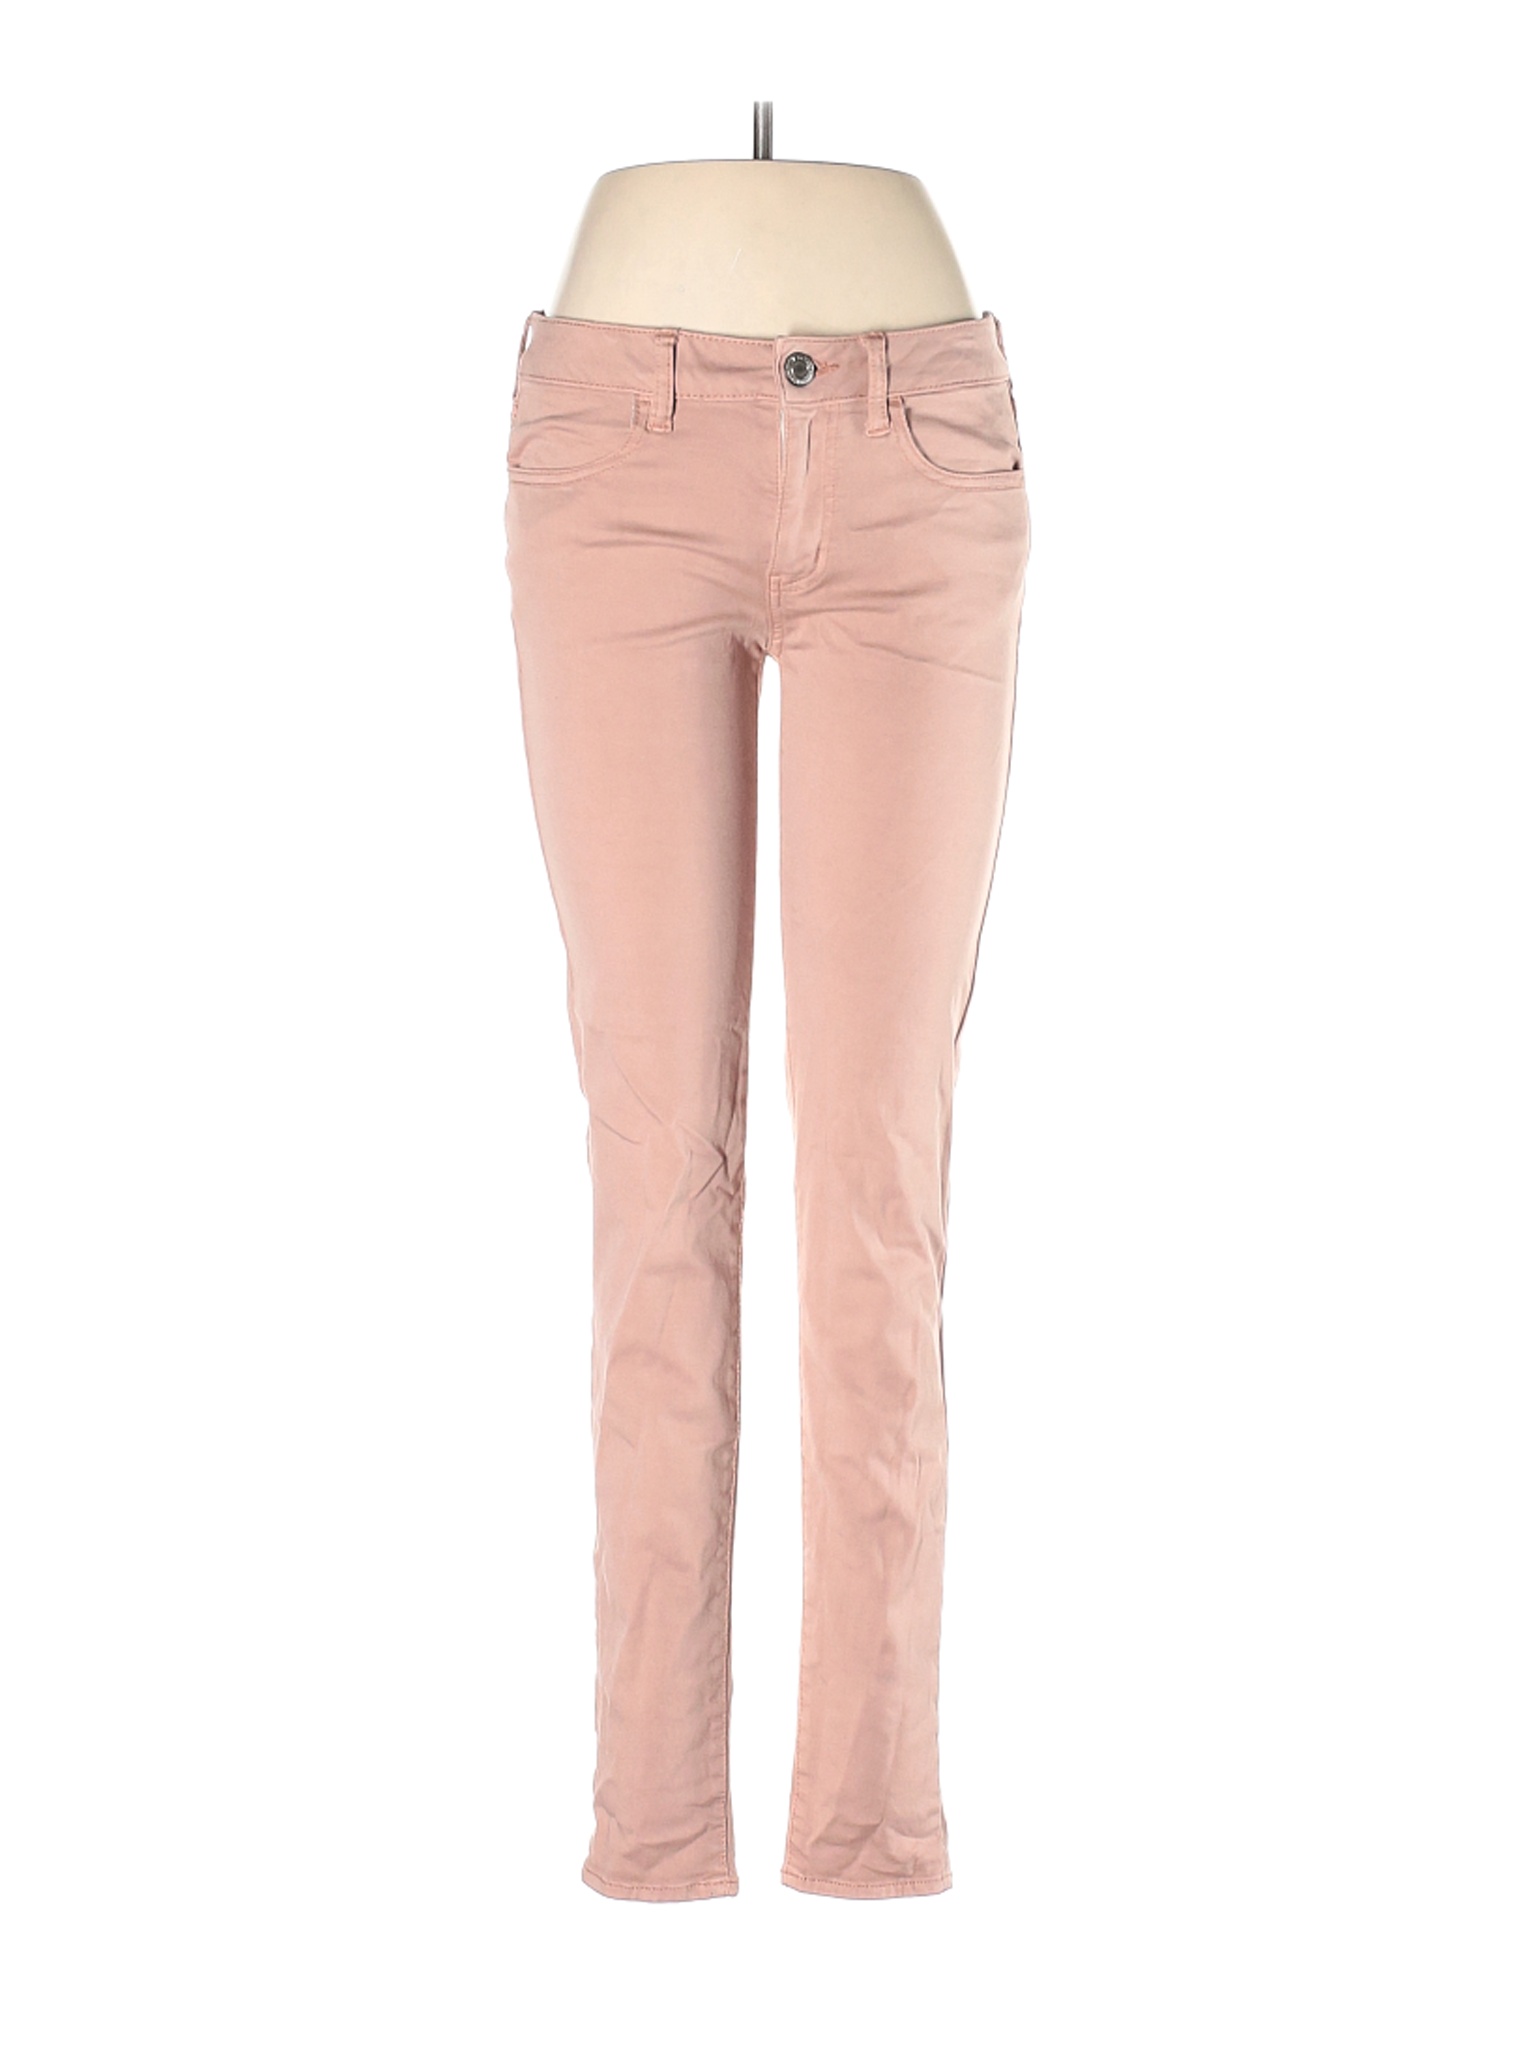 American Eagle Outfitters Women Pink Jeans 8 Tall | eBay